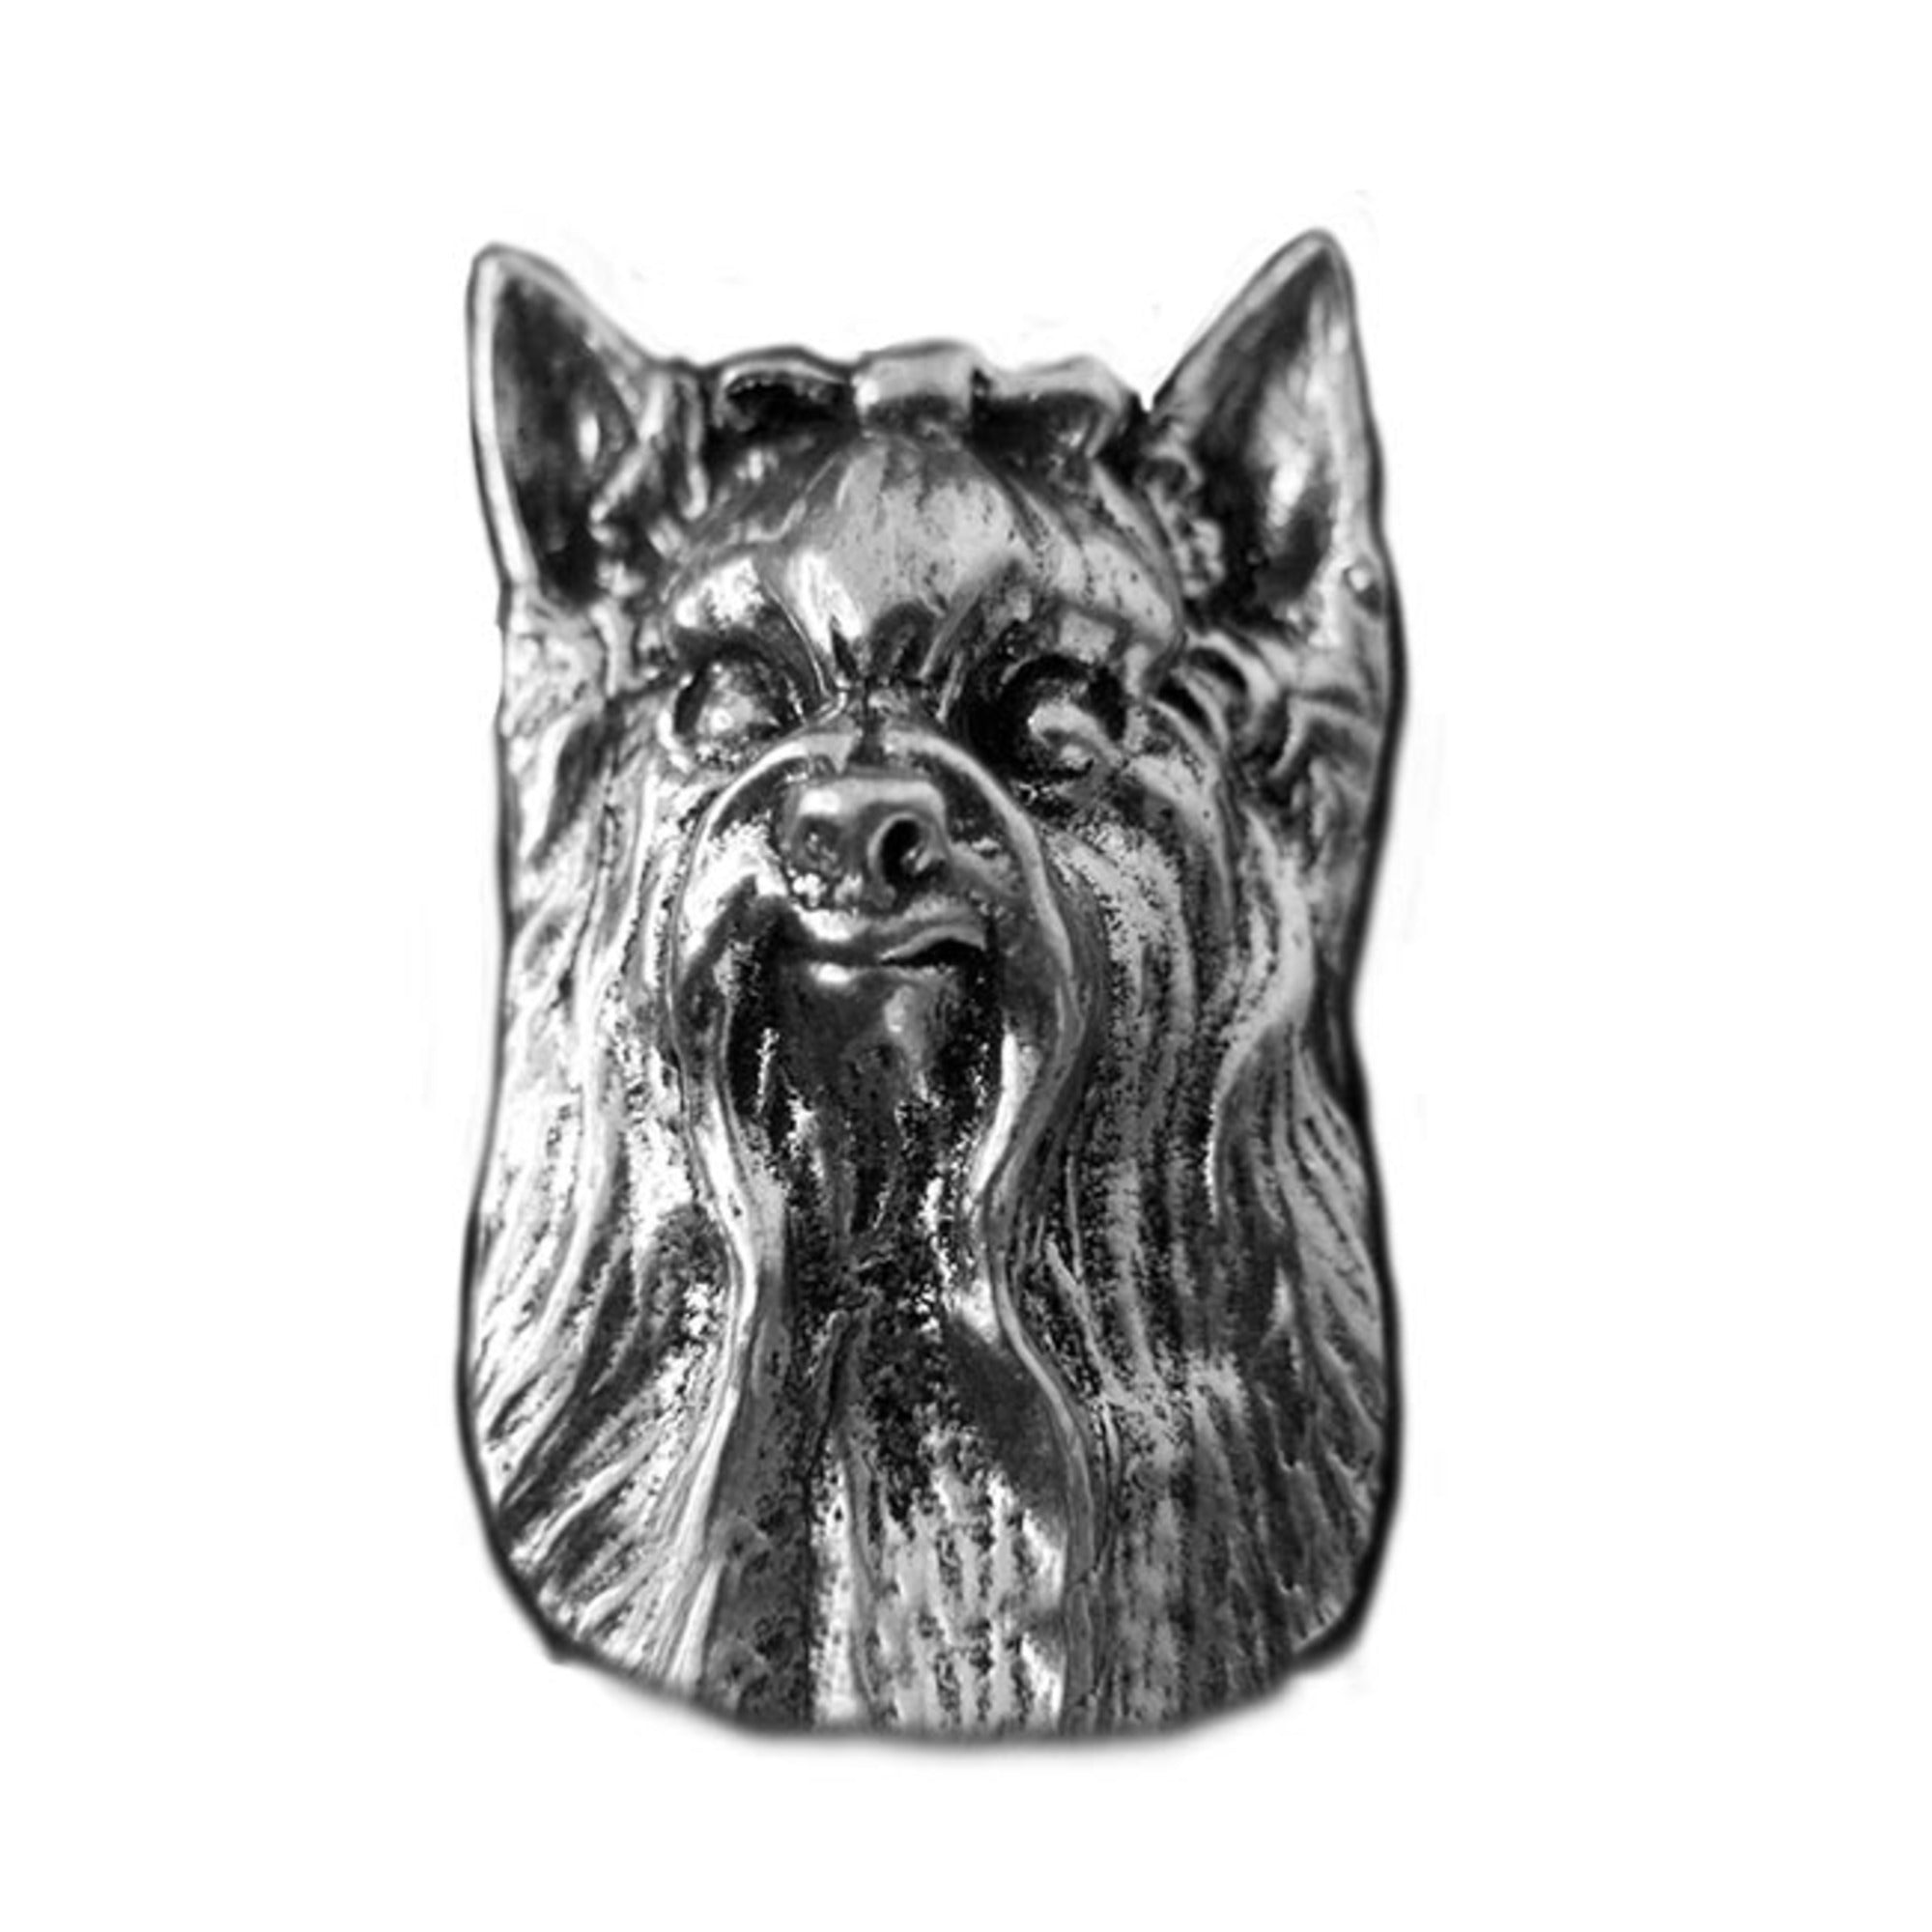 New-Spin Metal Casting Yorkie Magnet